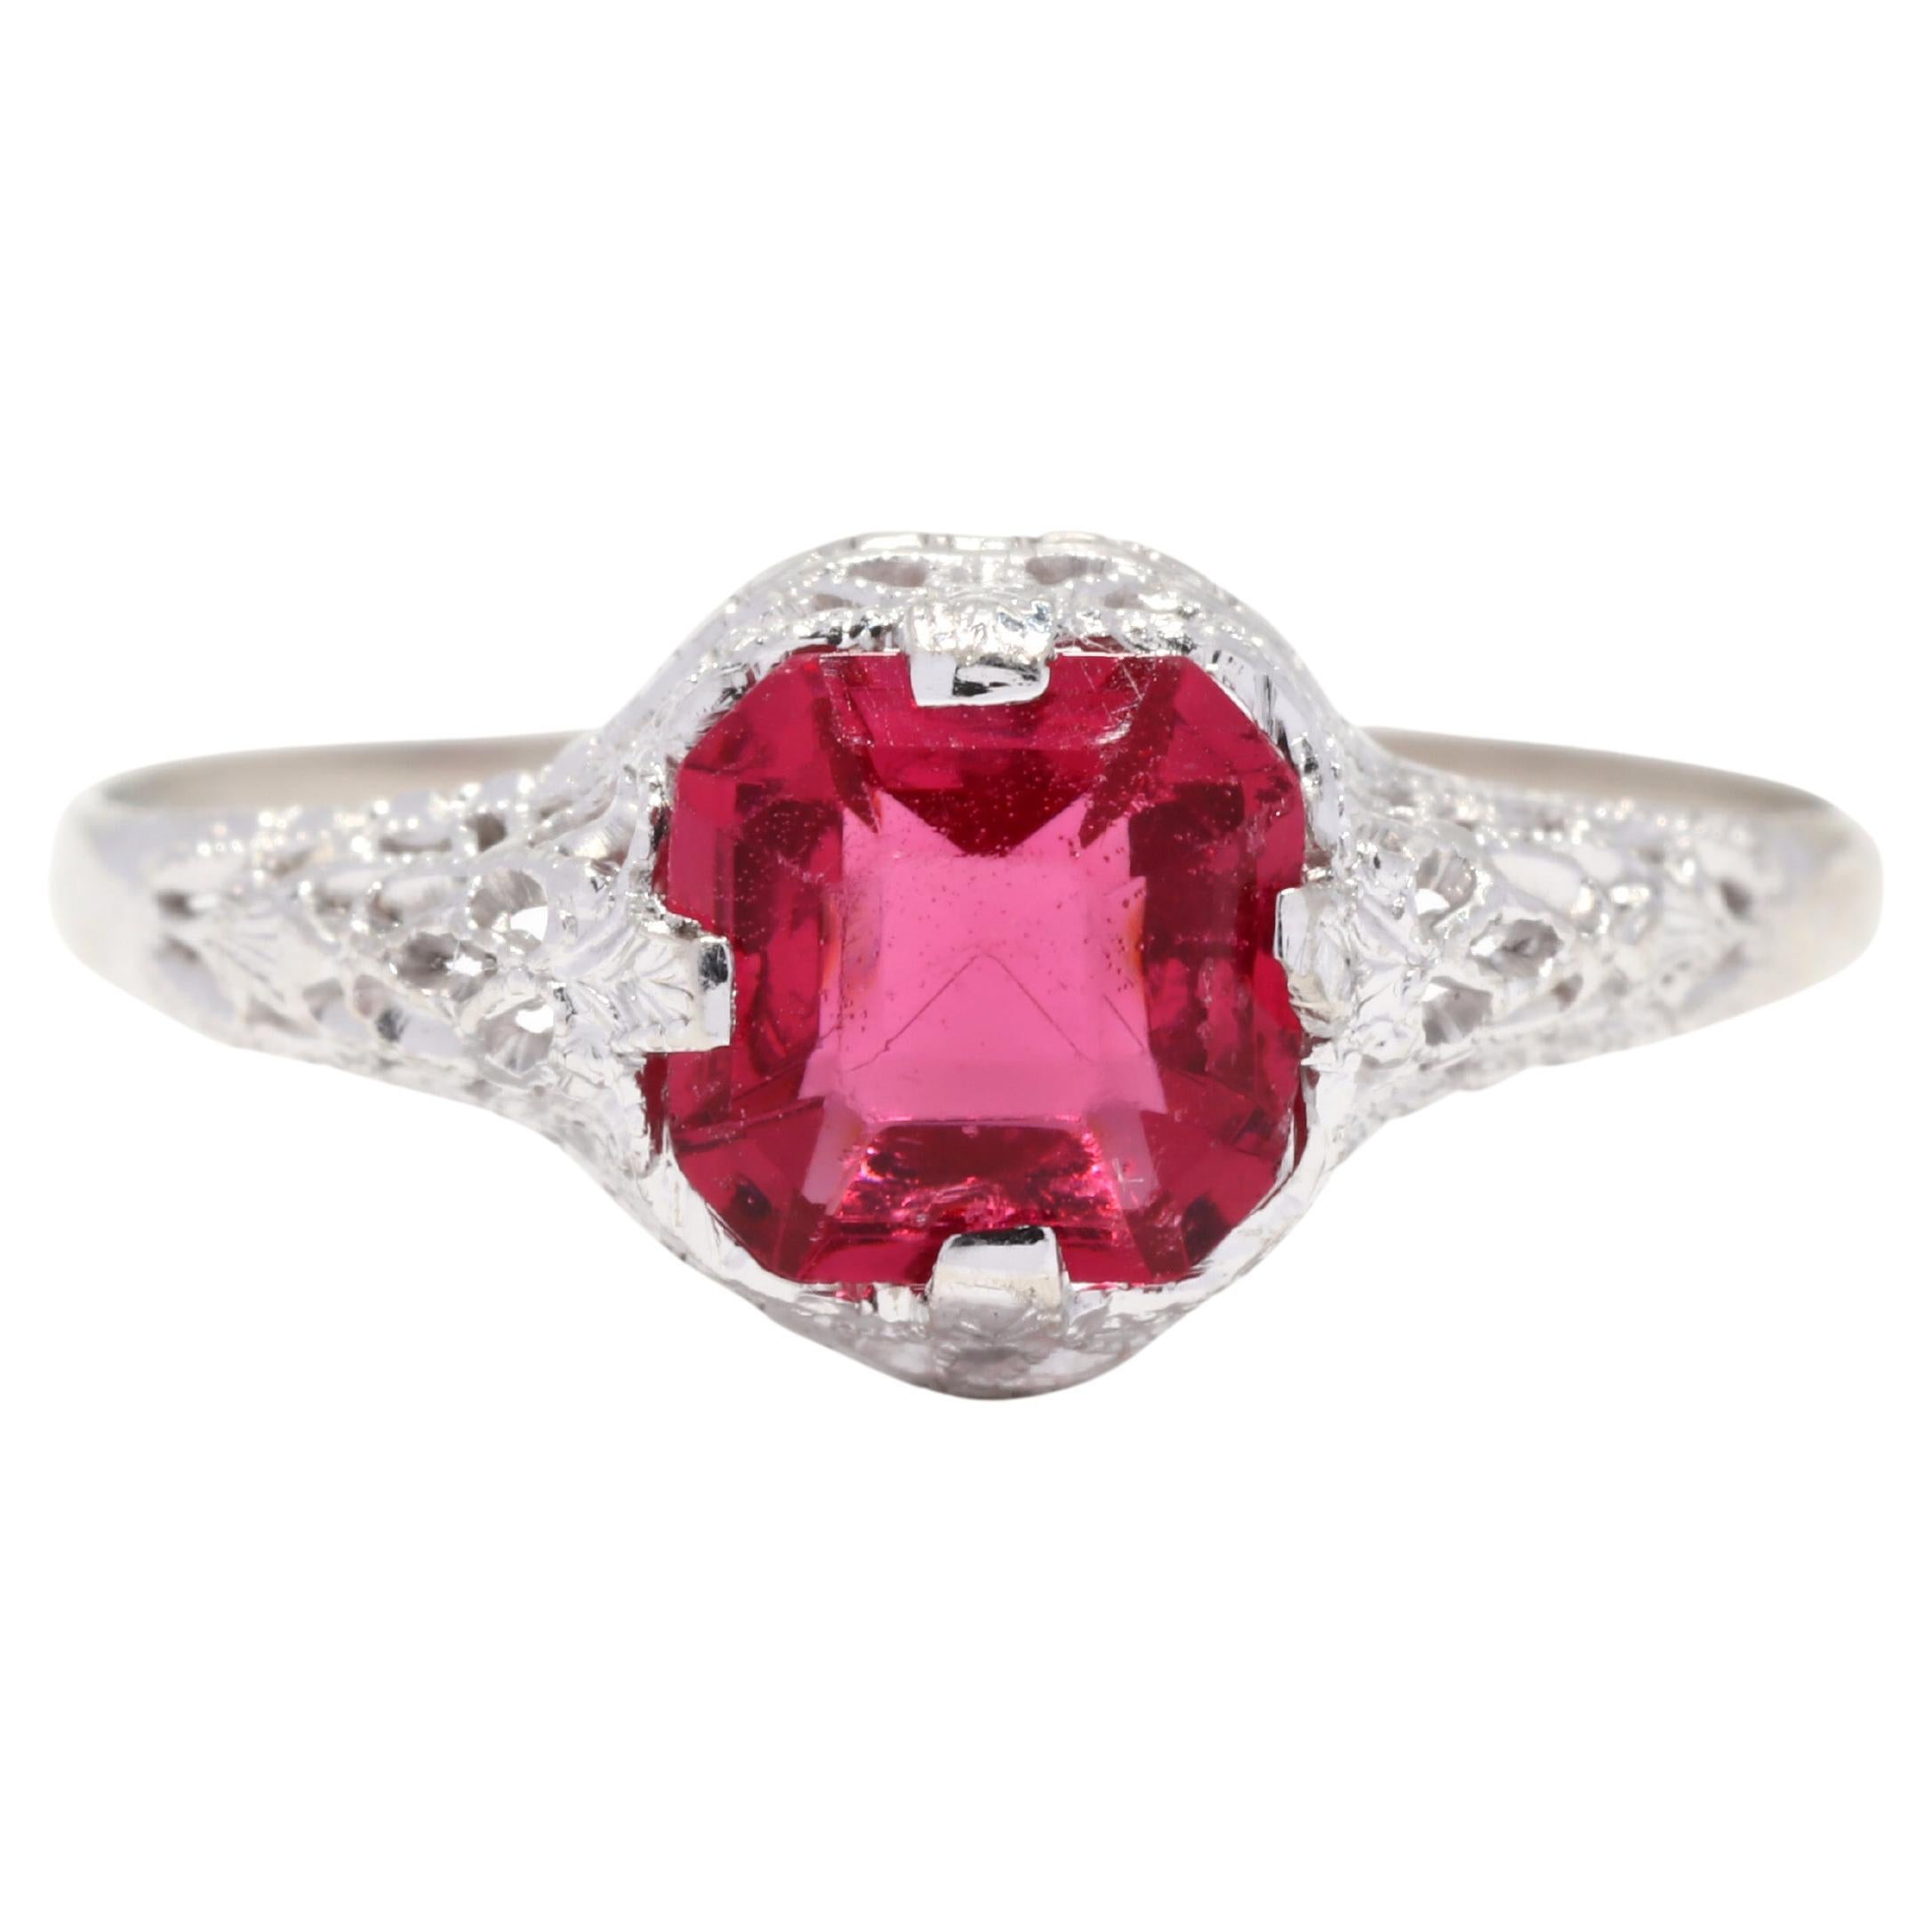 Vintage Created Ruby Filigree Ring, 10K White Gold, Red Ruby Ring, Vintage Engag